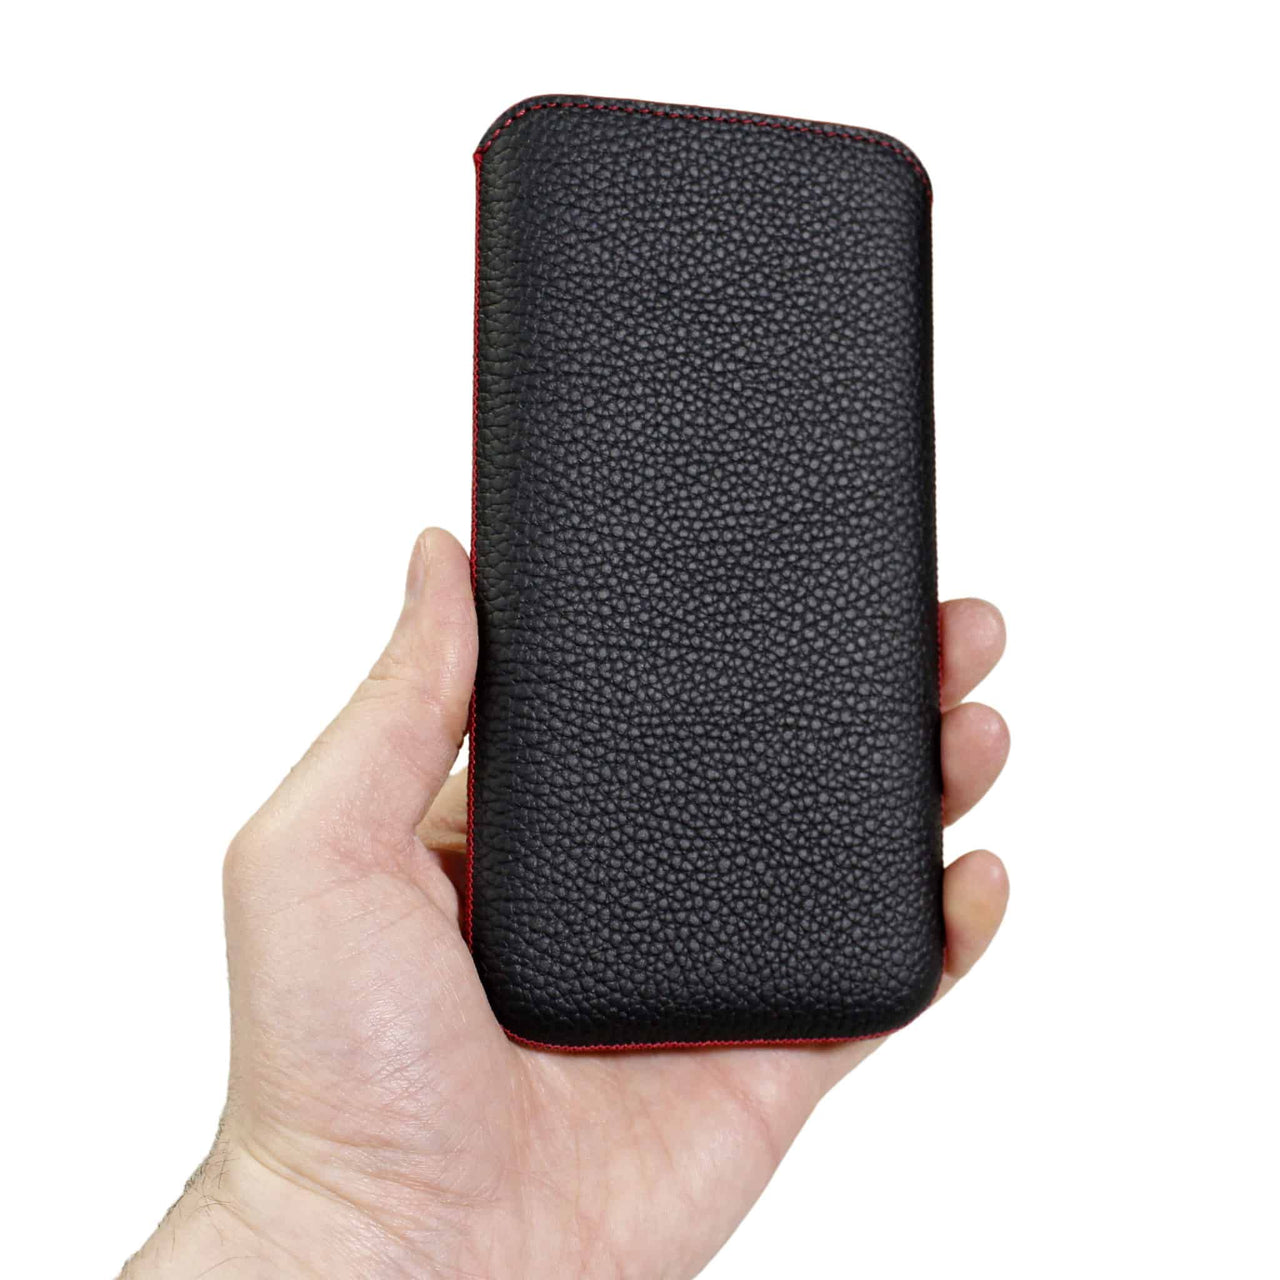 iPhone 11 Pro Genuine Leather Pouch Sleeve Case | Artisanpouch